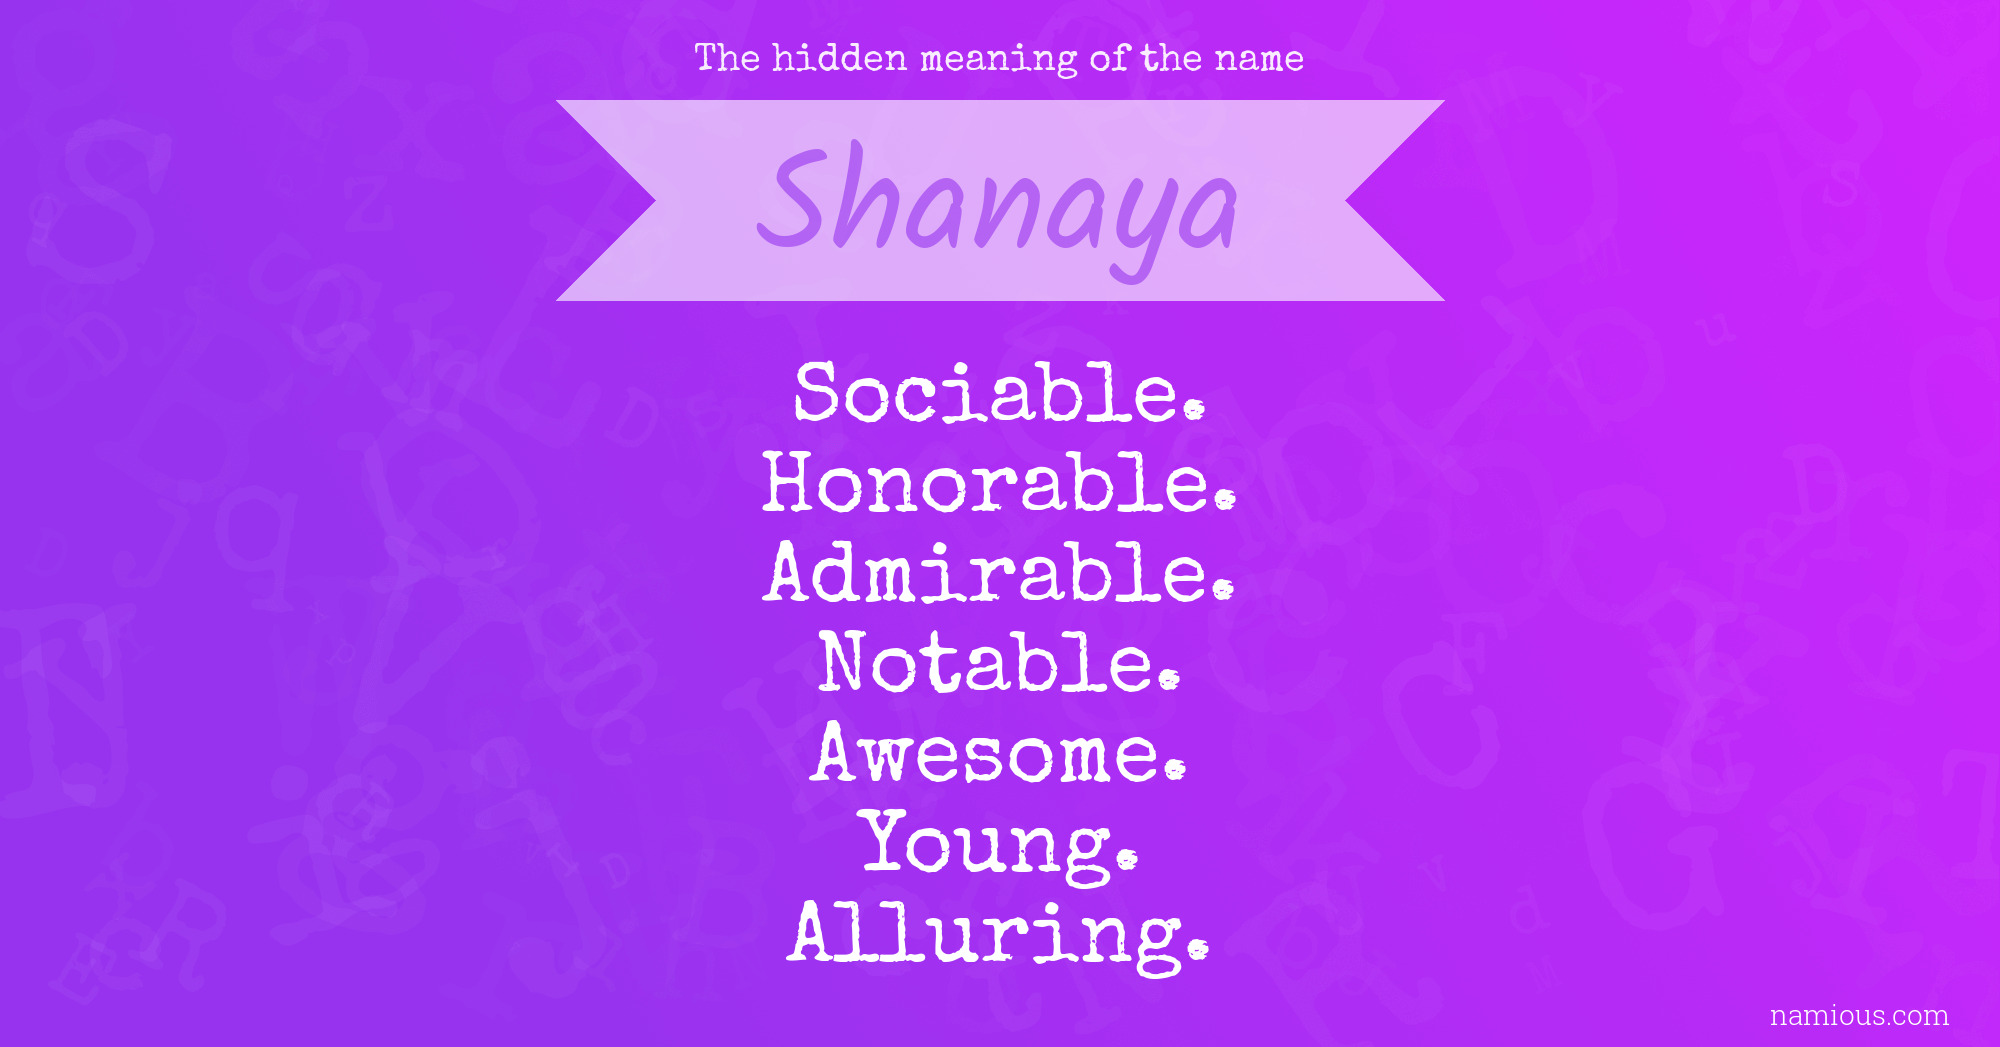 The hidden meaning of the name Shanaya